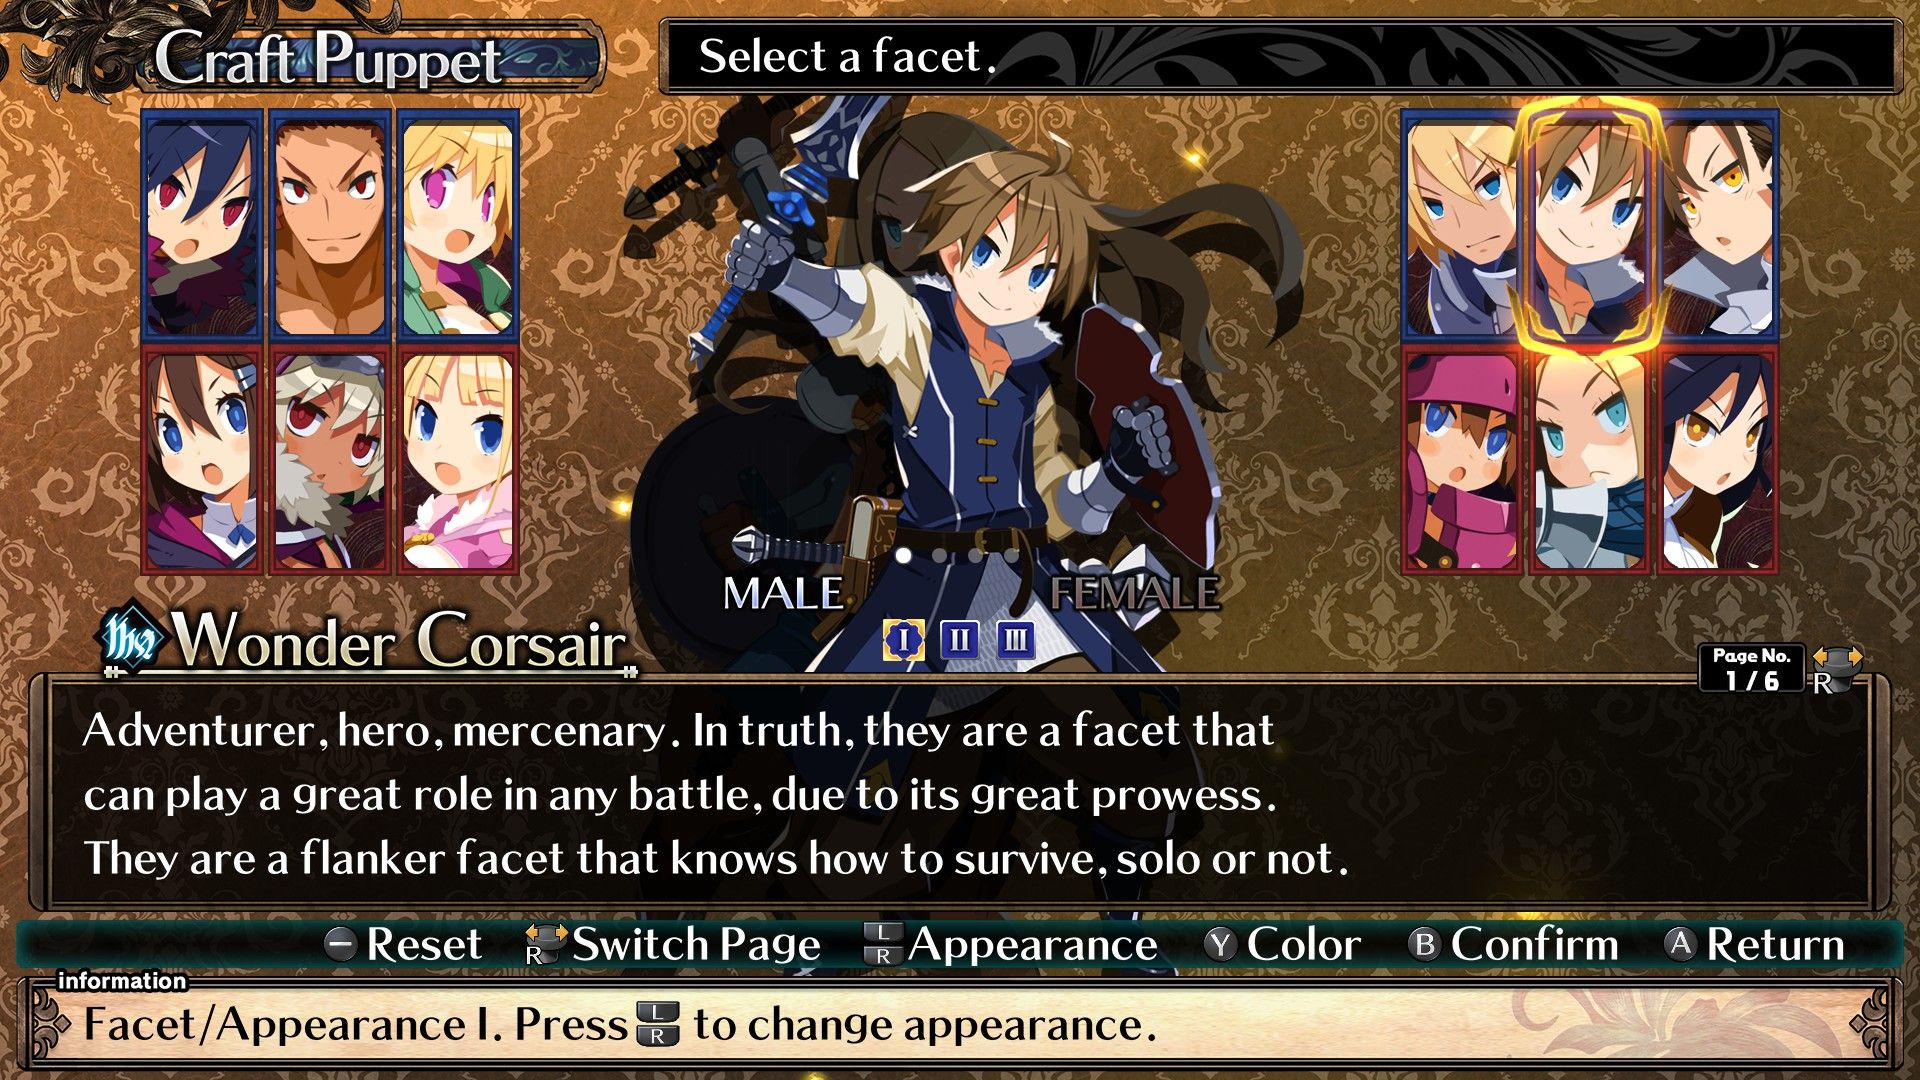 Labyrinth Of Galleria: The Moon Society Wonder Corsair character creation screen showing the male character and class description.